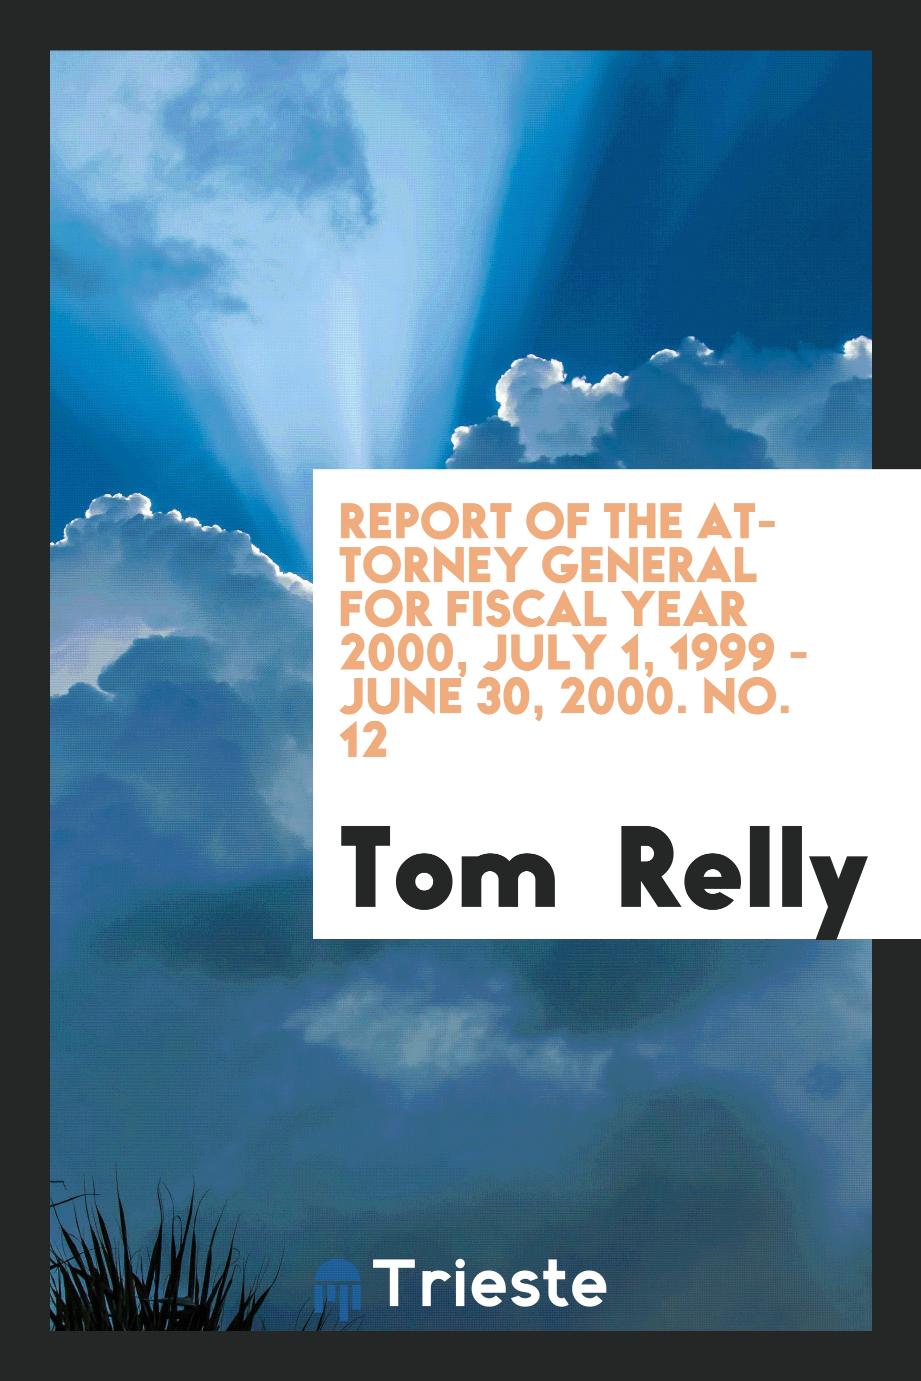 Report of the Attorney General for fiscal year 2000, July 1, 1999 - June 30, 2000. No. 12